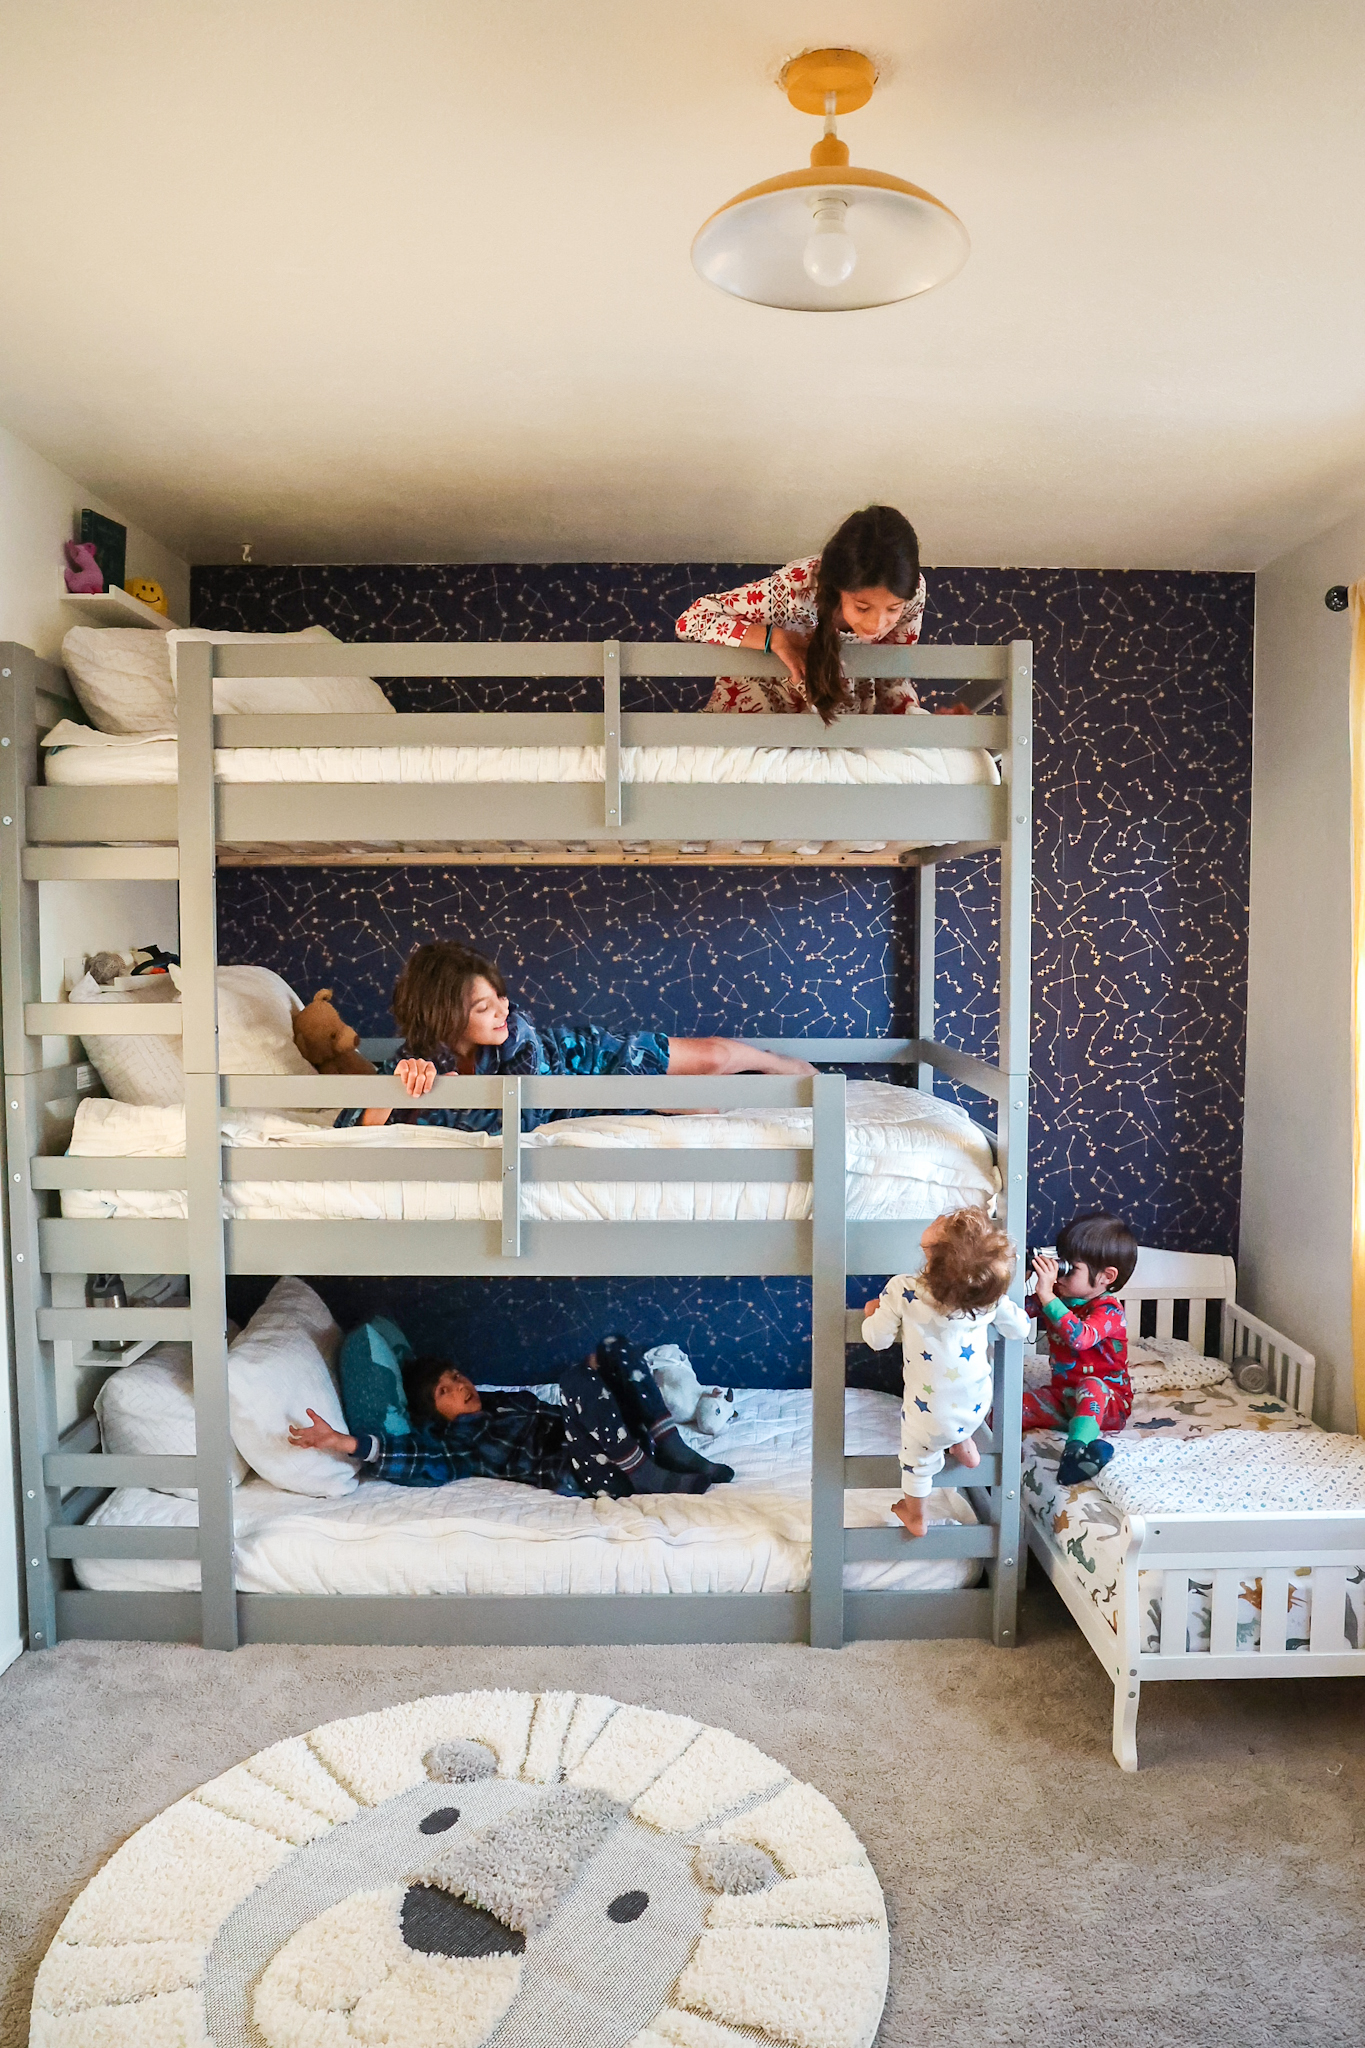 Our Kids Triple Bunk Room Local, Triple Bunk Bed Kids